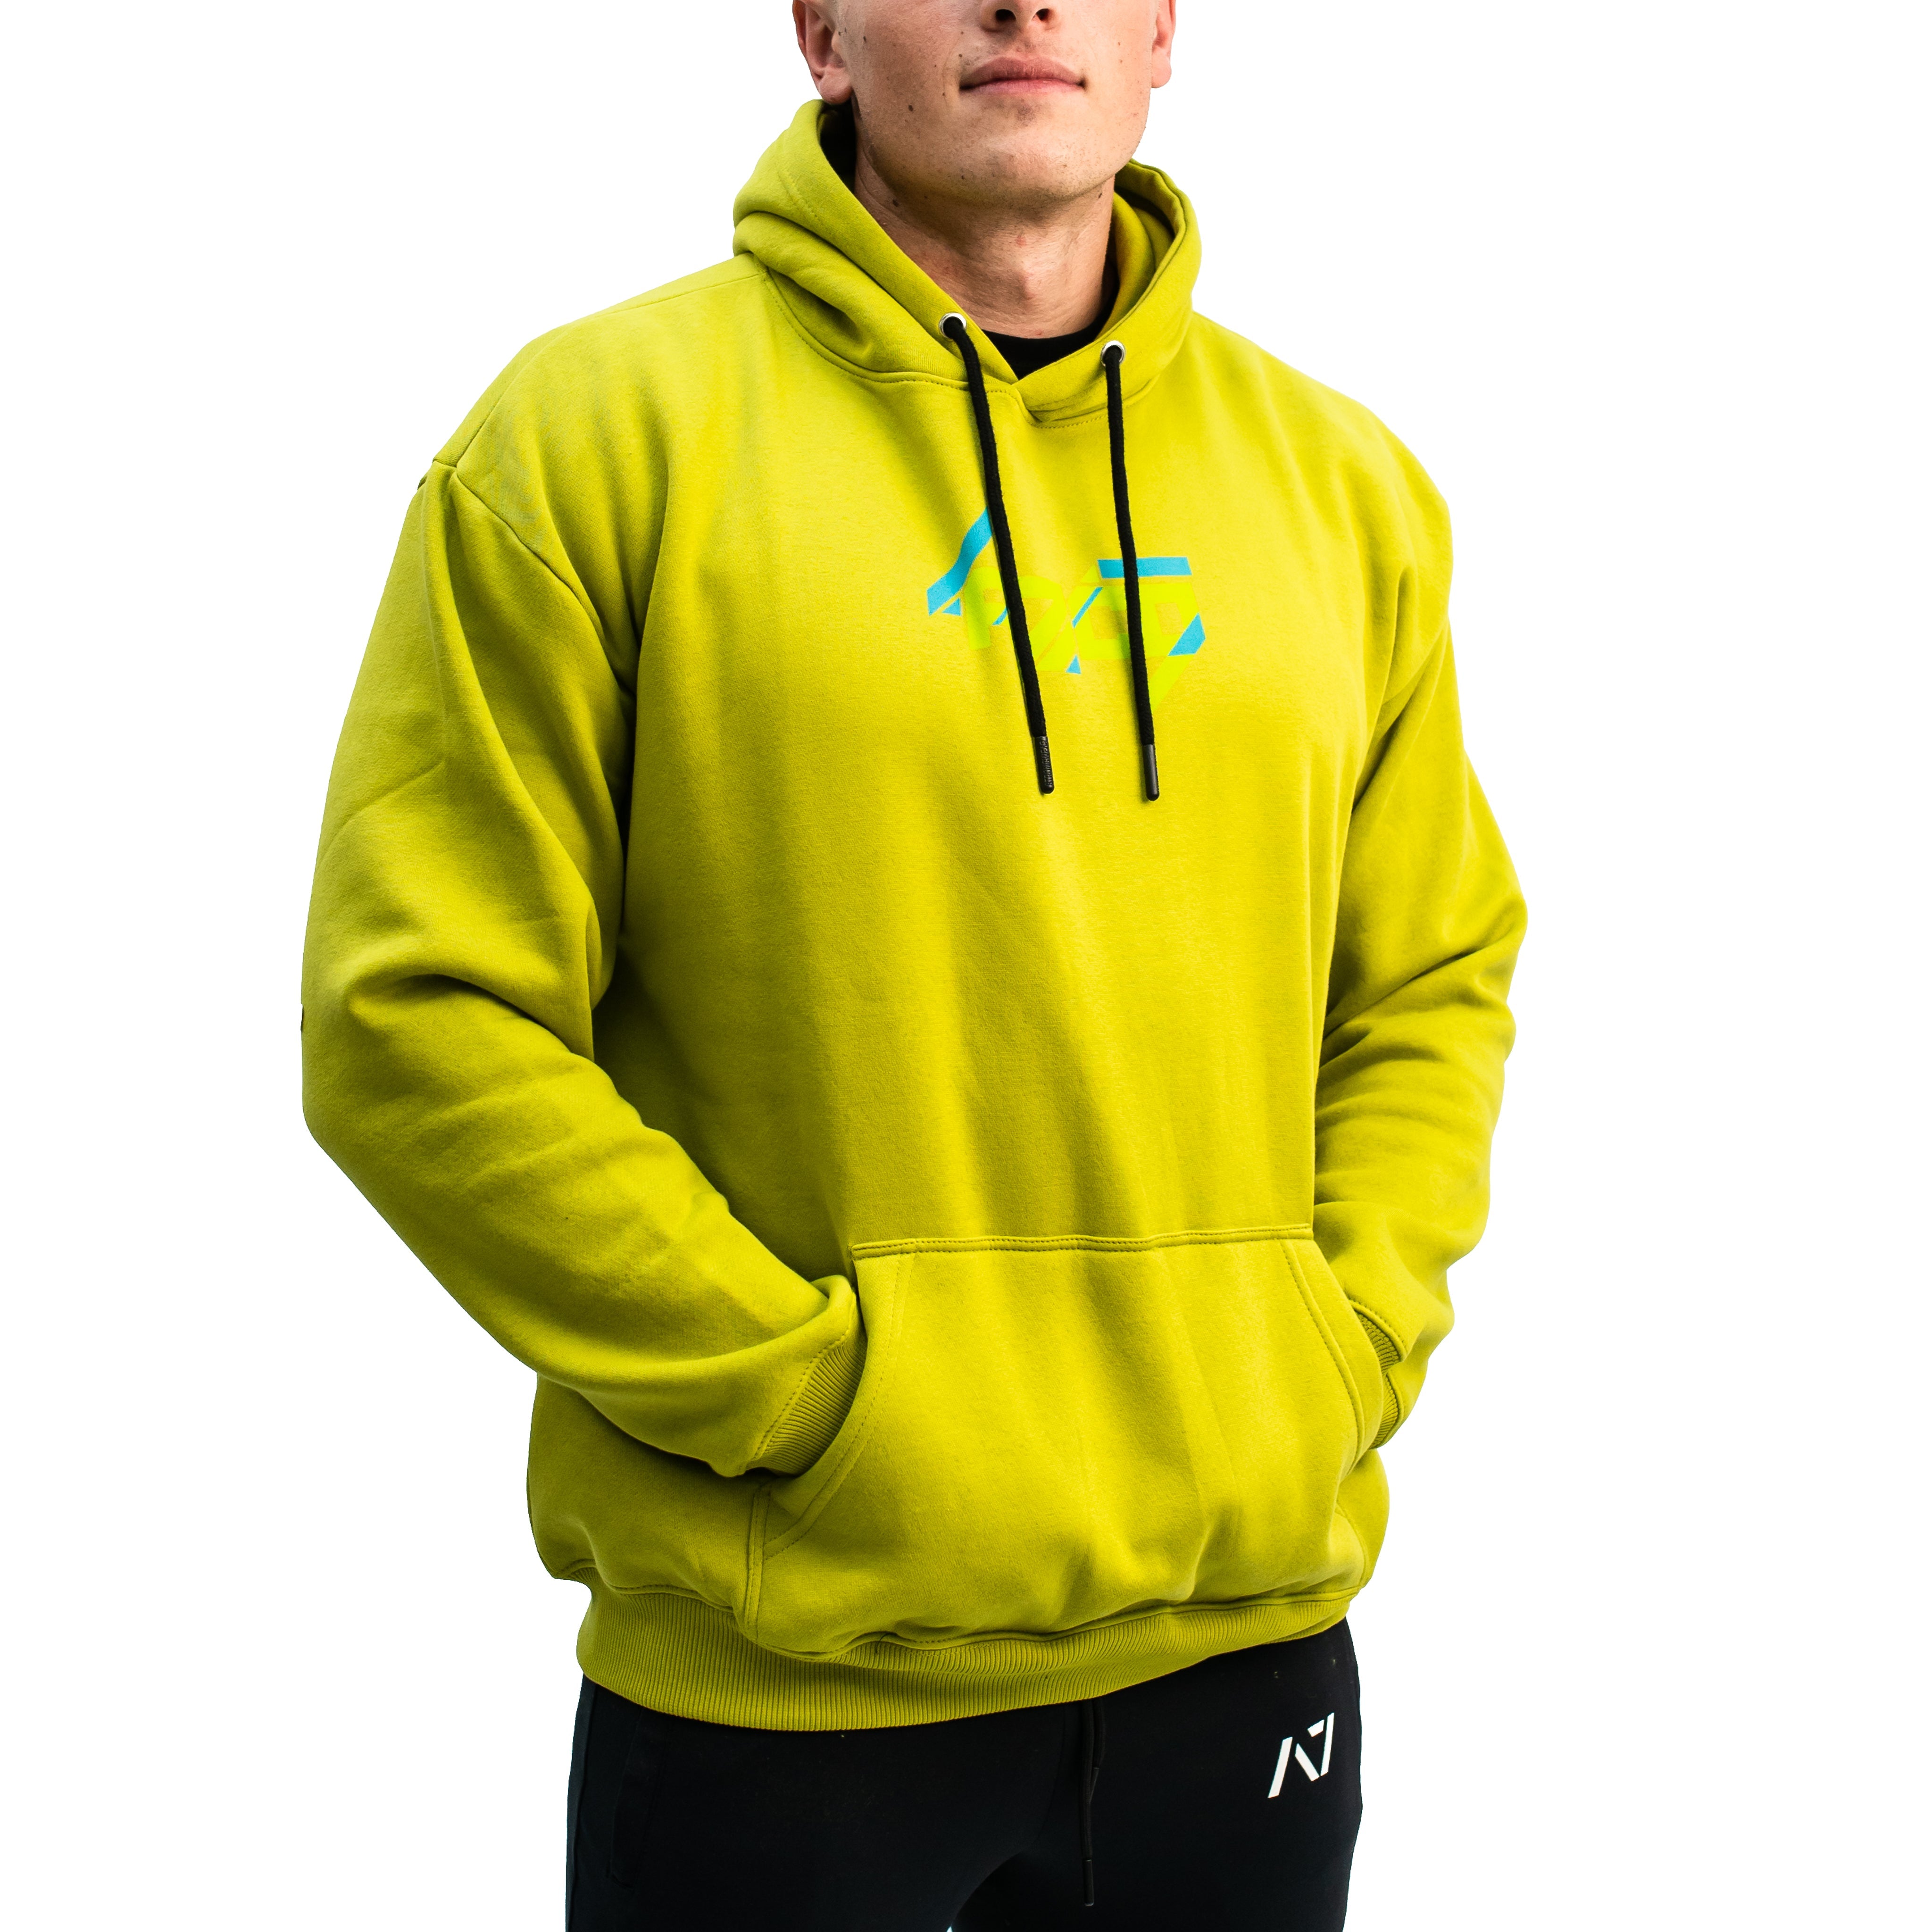 Live The Barbell extends past your gym experience. Our LTB Collection is centered around the idea of evolving and treating your life like a barbell in your hand - being able to carry heavier weight on your shoulders and becoming stronger every day. LTB Hinge reminds us of this lifestyle in a colourful lime green colourway. A7UK supplies the best Powerlifting apparel for all your workouts. Available in UK and Europe including France, Italy, Germany, the Netherlands, Sweden and Poland.